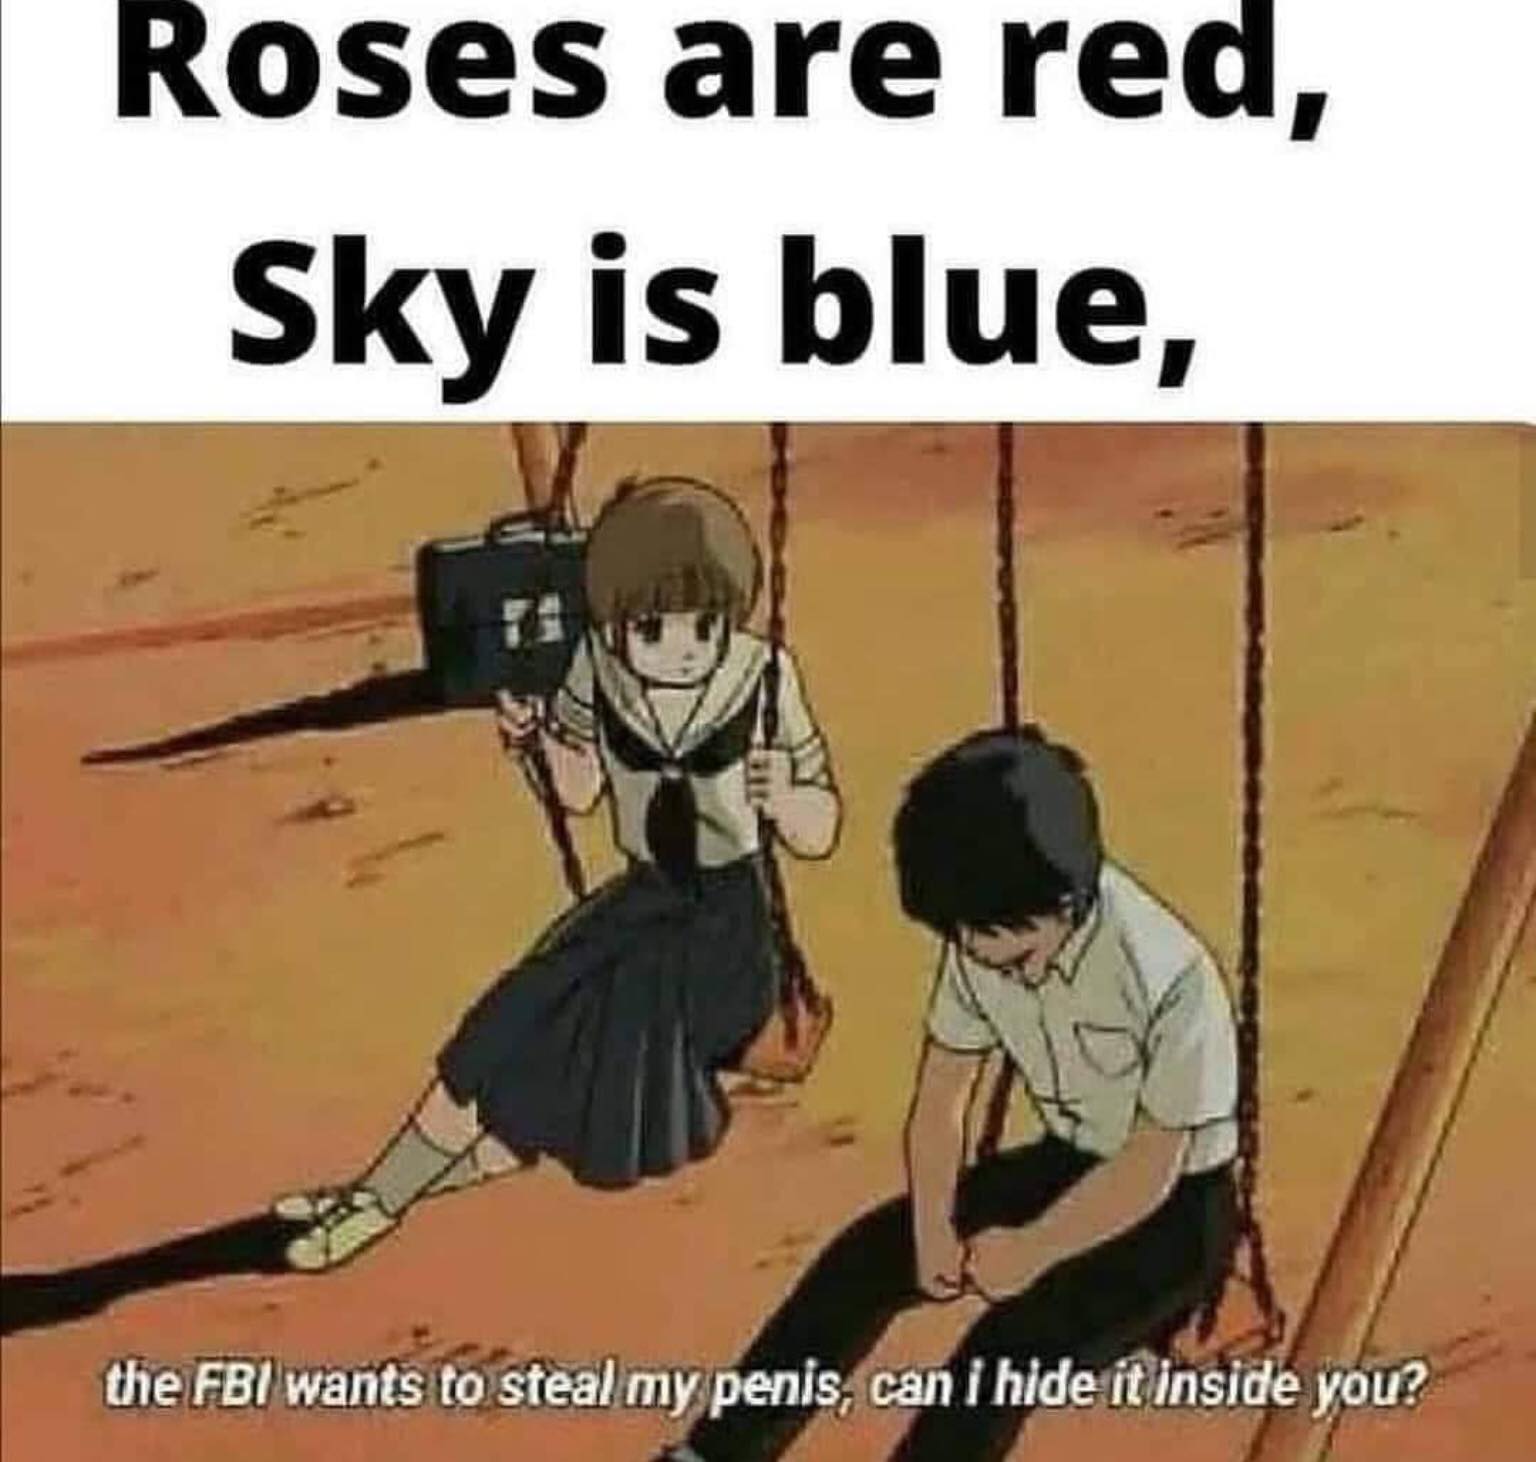 fbi wants to steal my penis anime - Roses are red, Sky is blue, . the Fbi wants to steal my penis, can i hide it inside you?